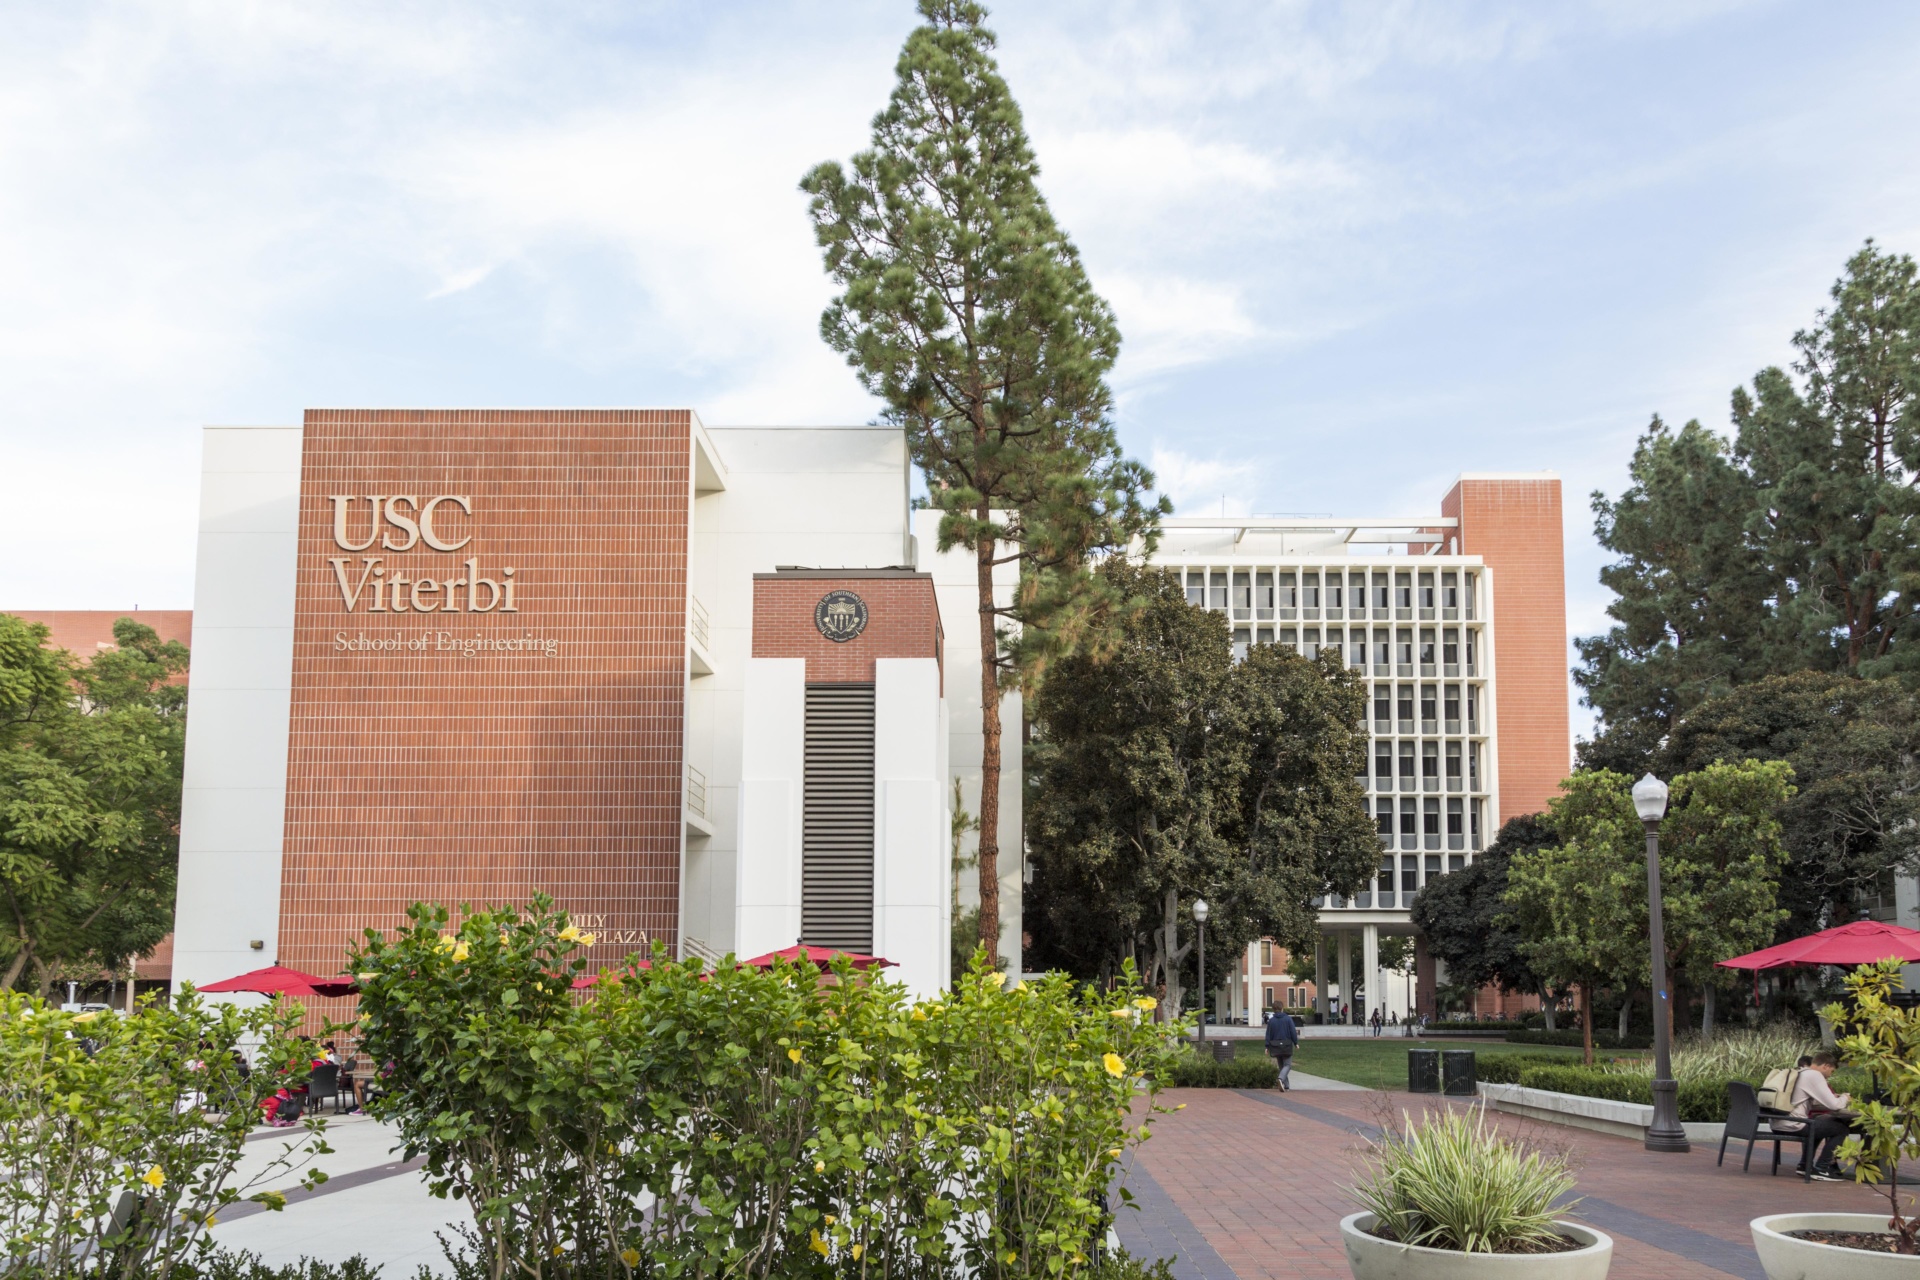 I didn’t get into USC – What’s Next?